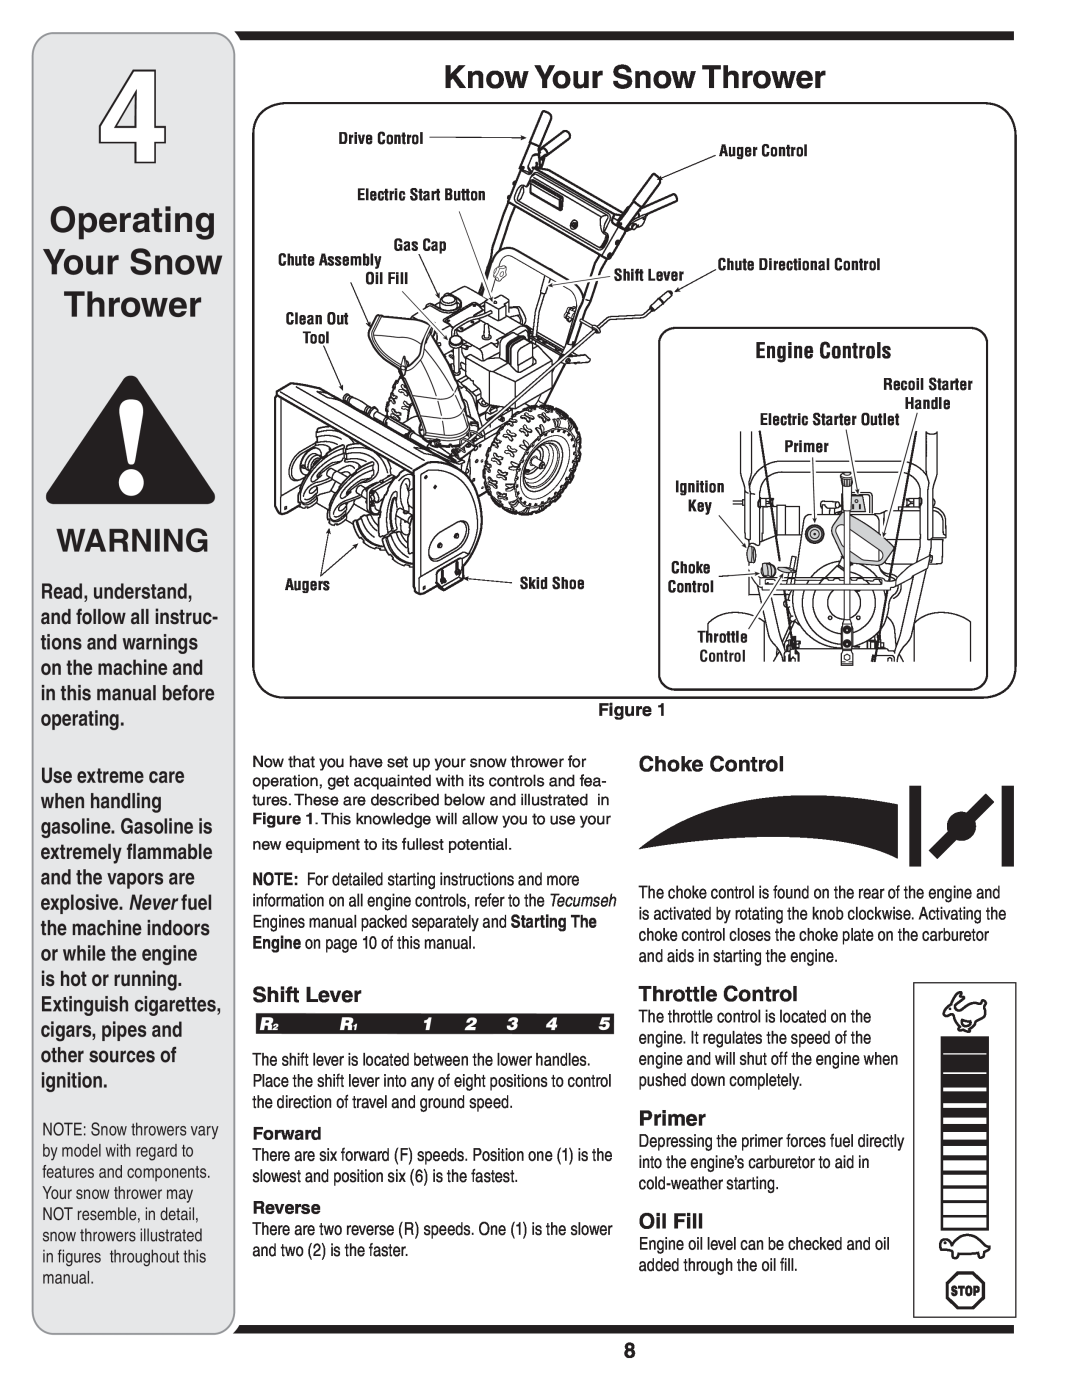 MTD D Style, C Style warranty Operating Your Snow Thrower, Know Your Snow Thrower, Forward, Reverse 